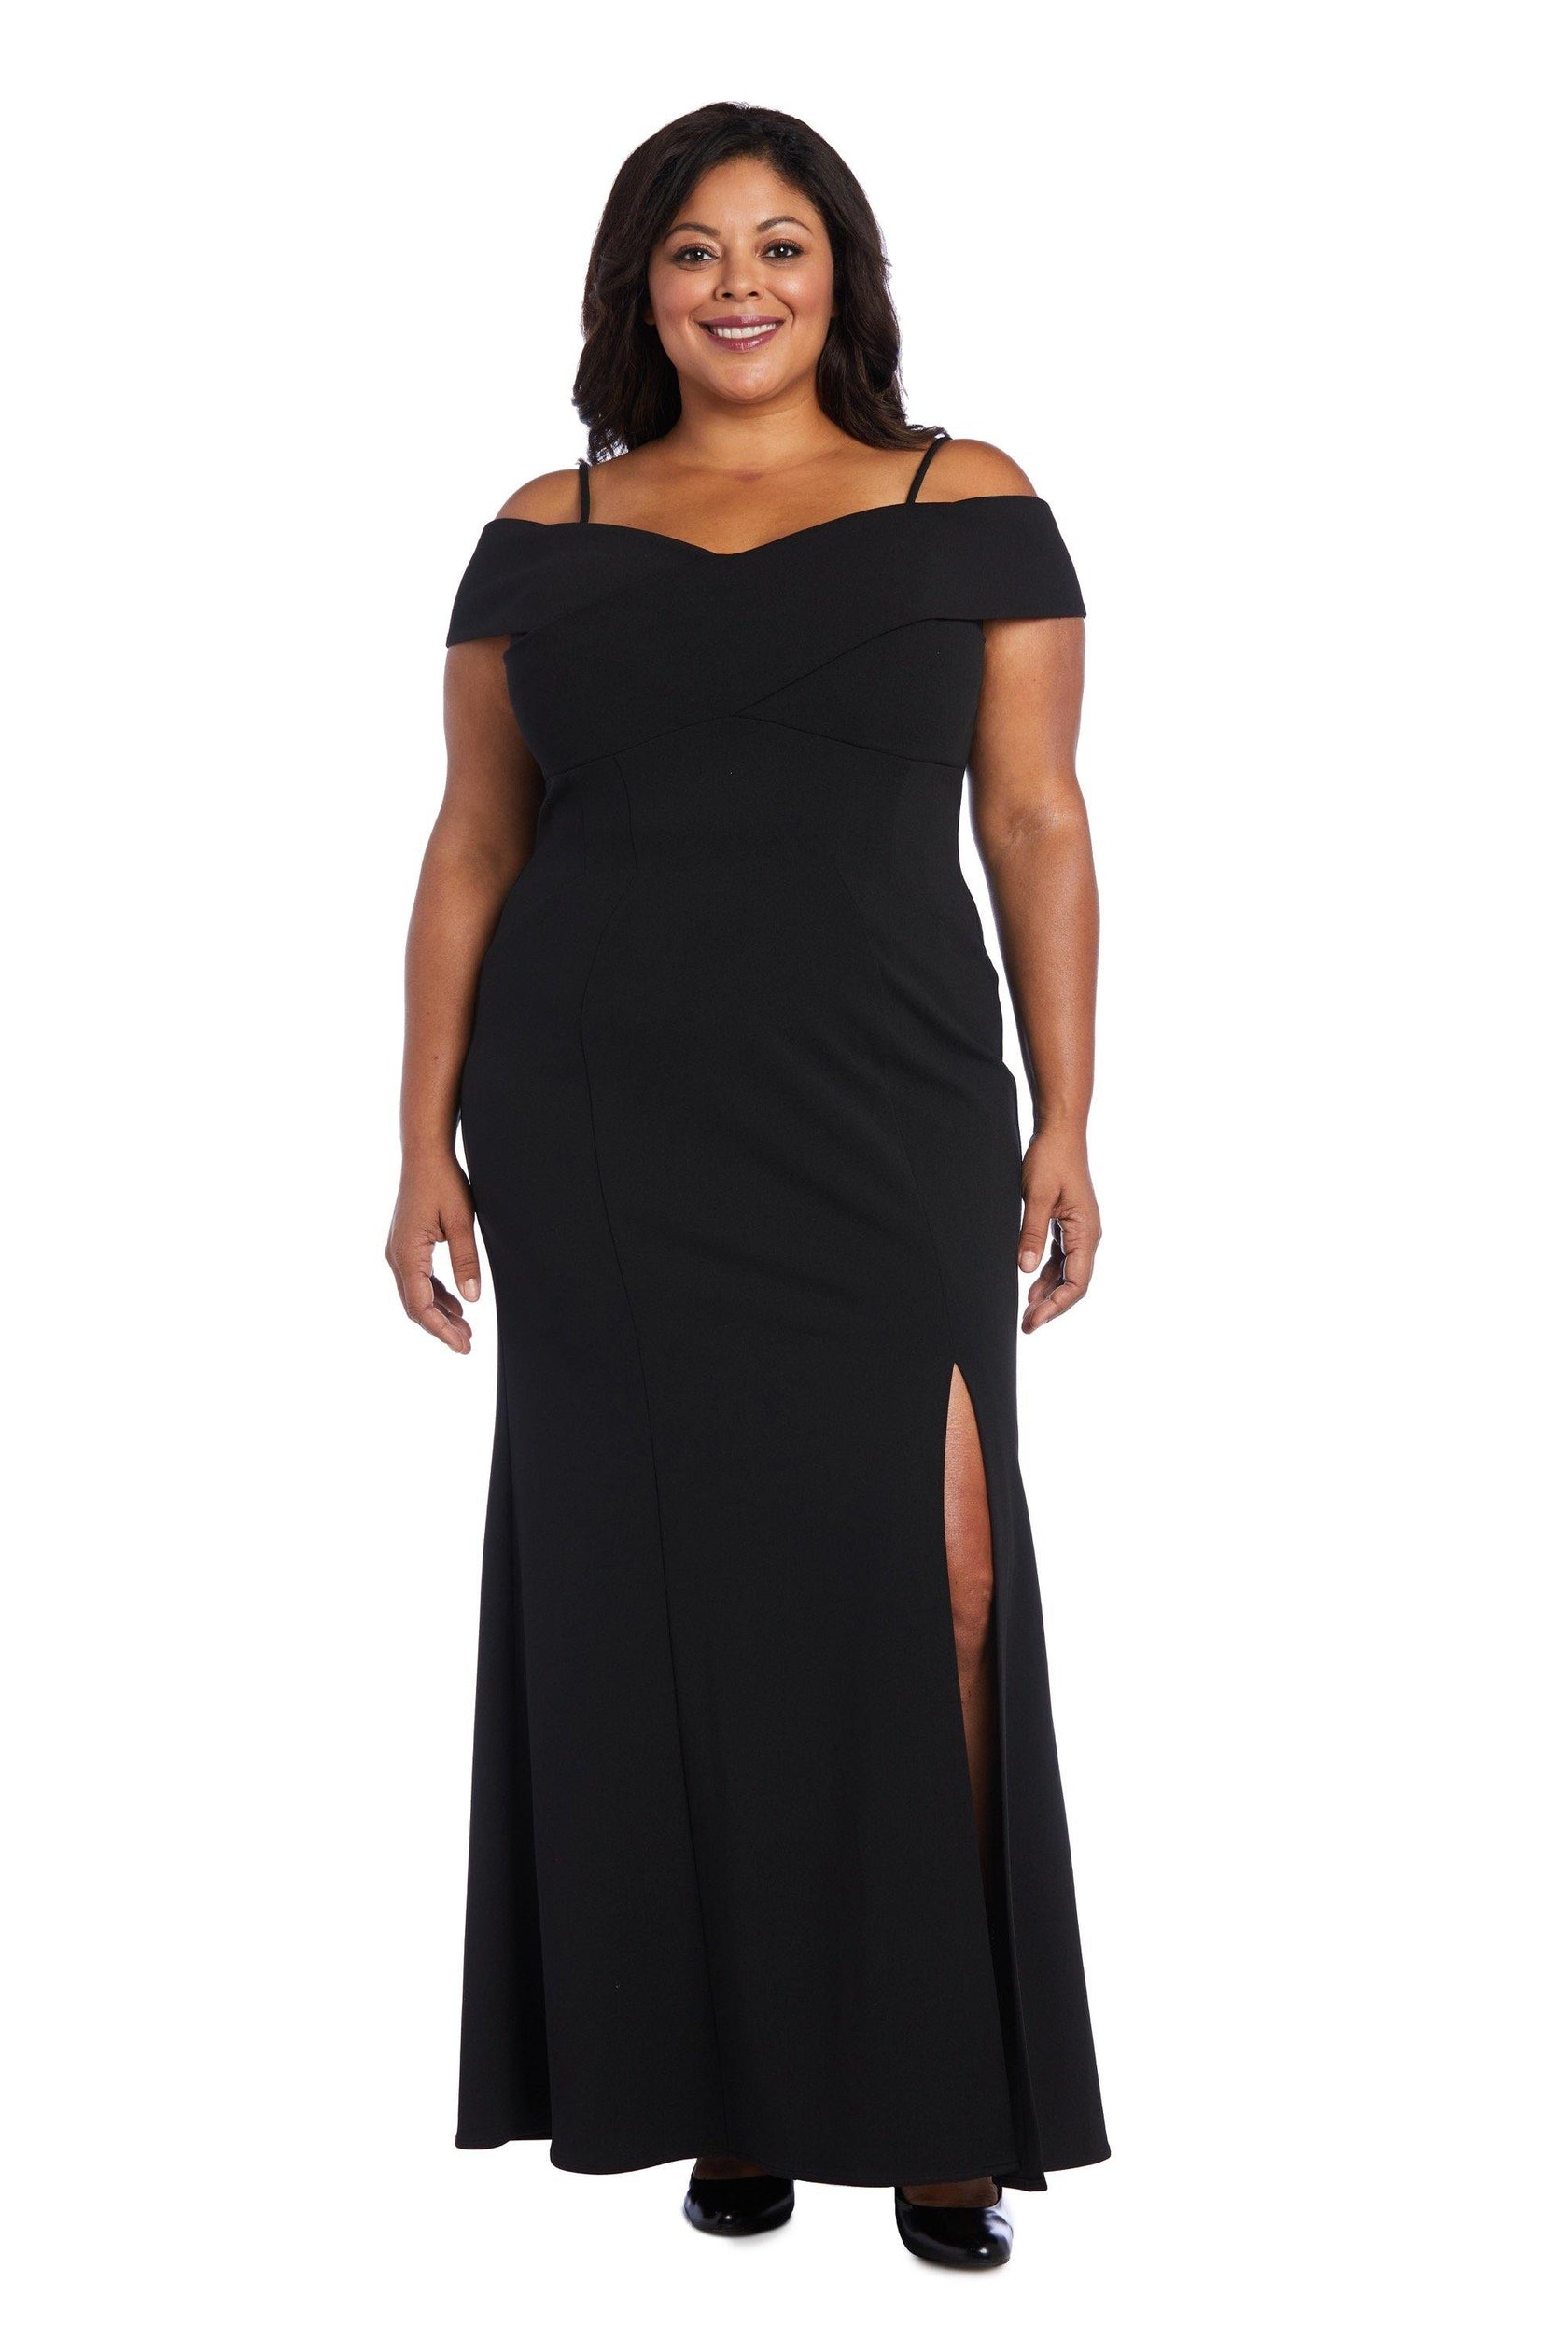 Nightway Plus Size Evening Long Dress 21825W for $74.99 – The Dress Outlet